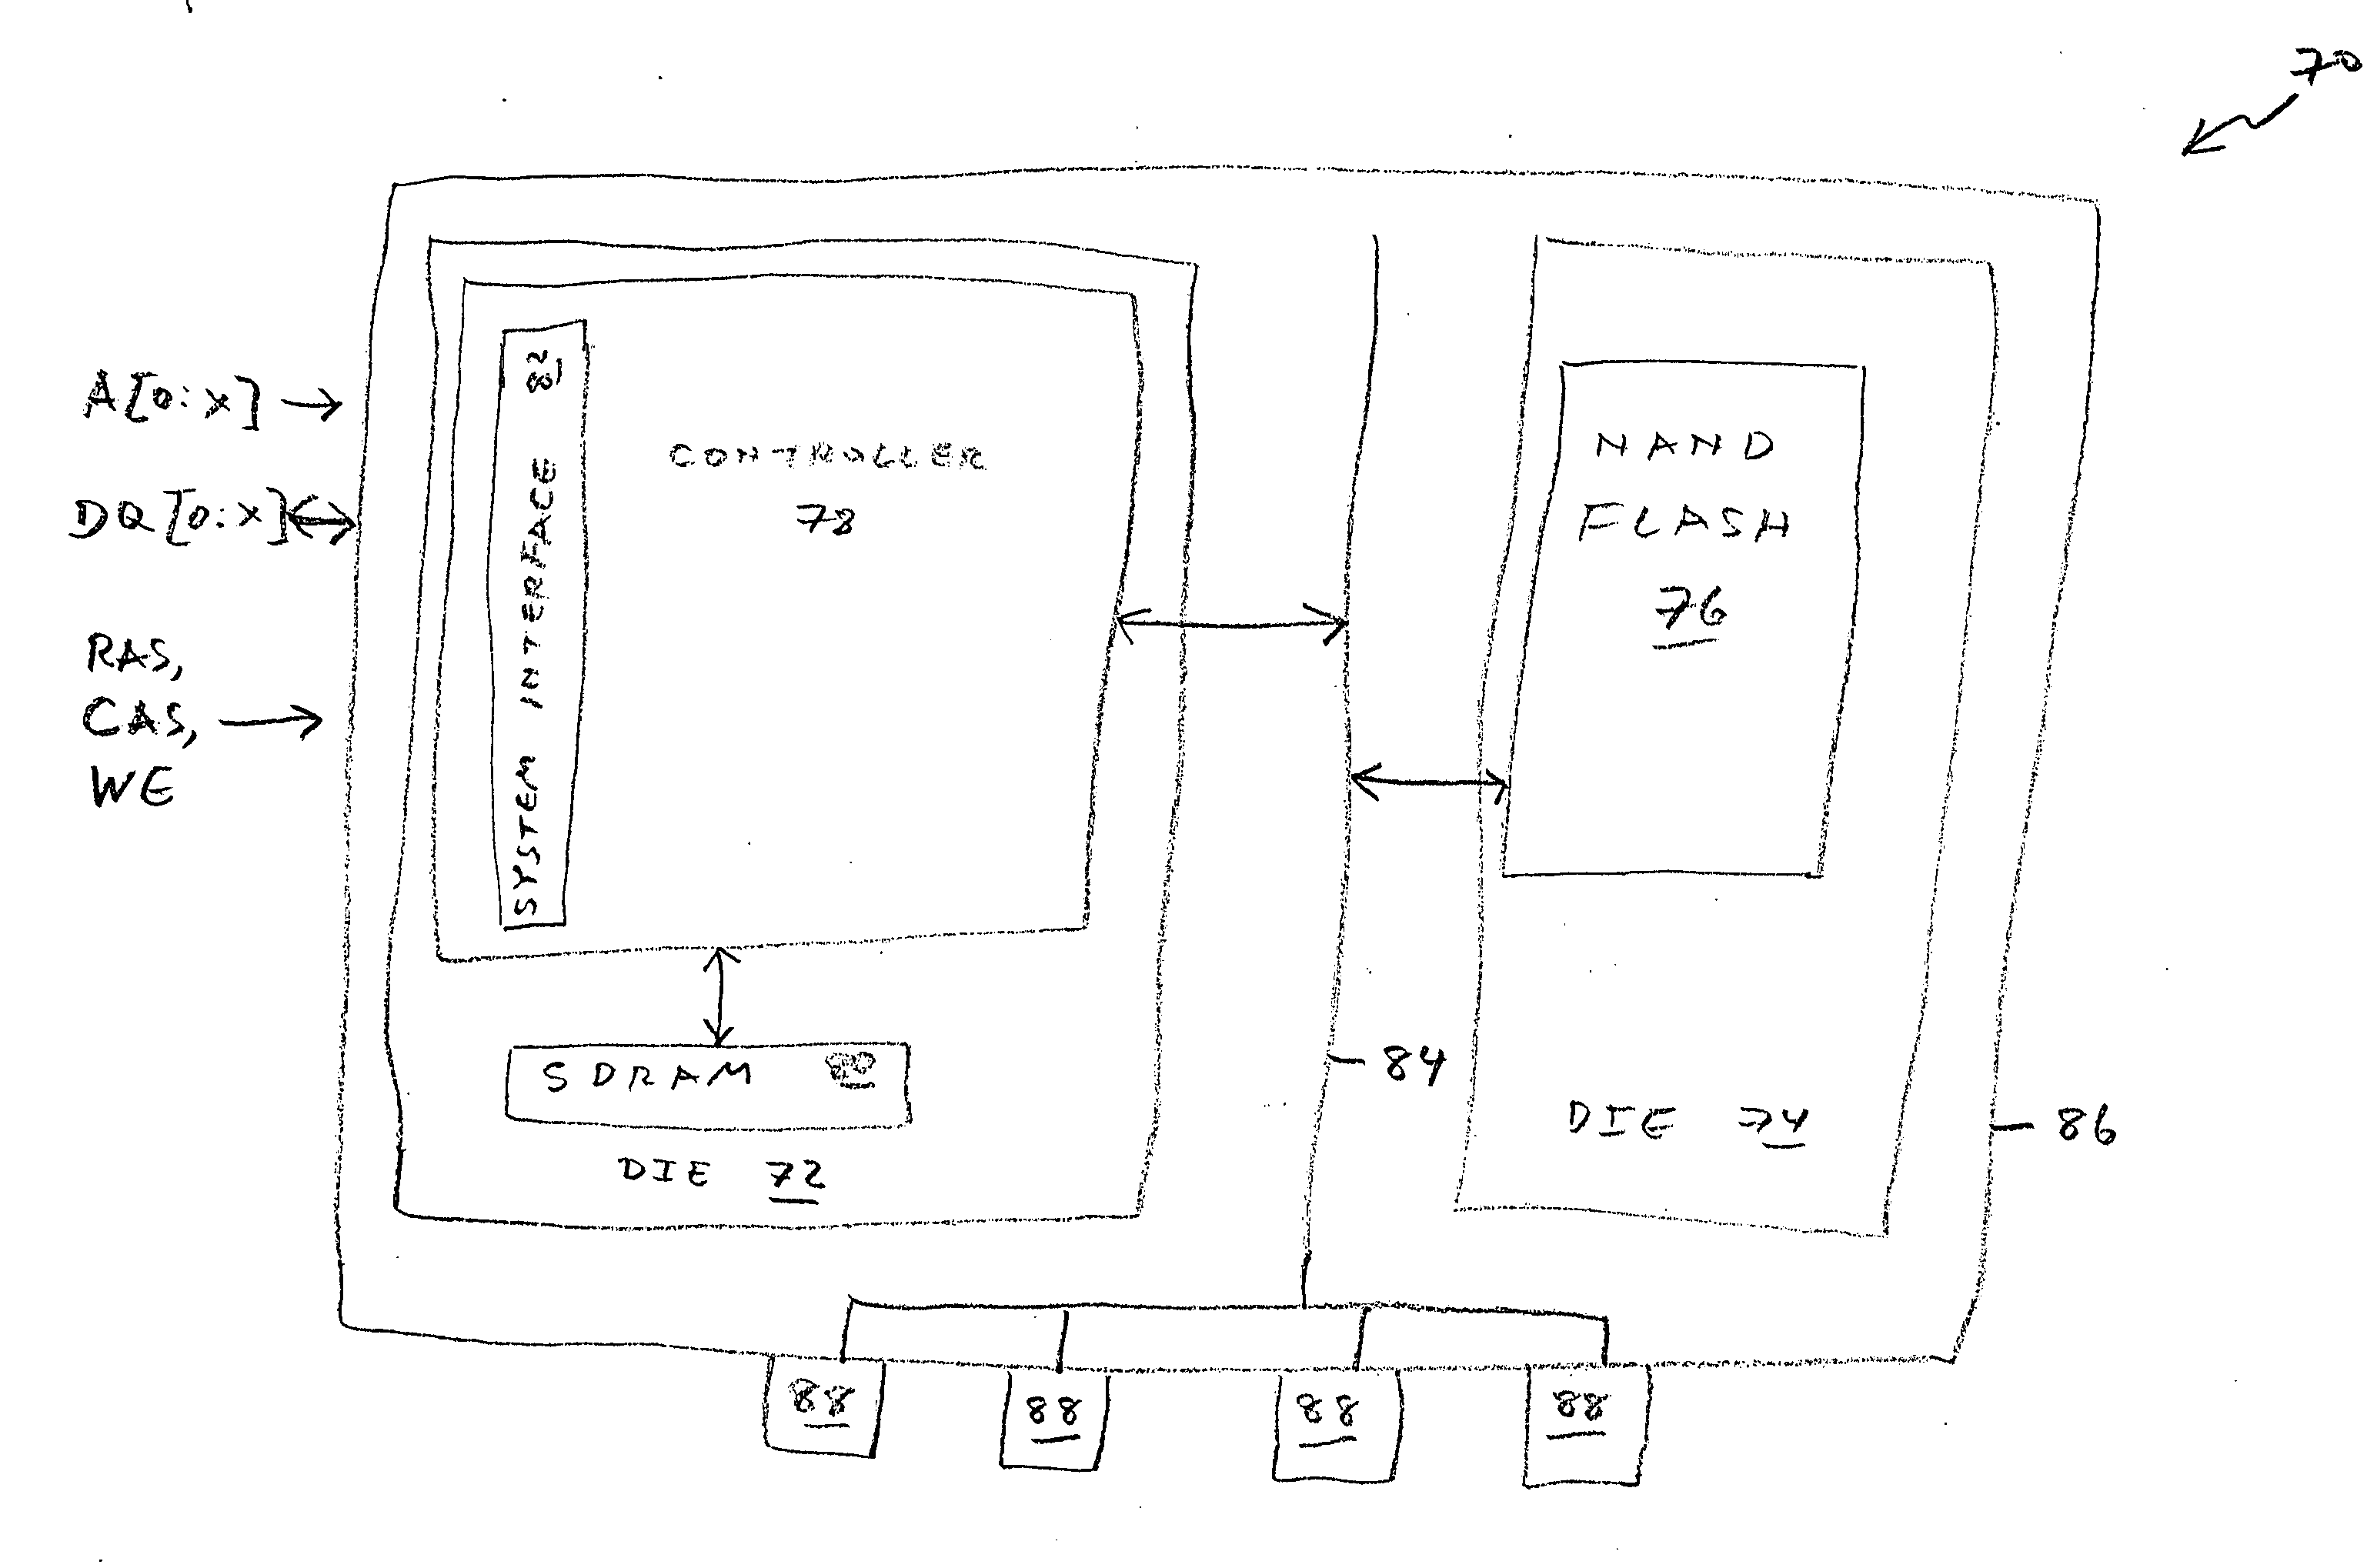 SDRAM memory device with an embedded NAND flash controller